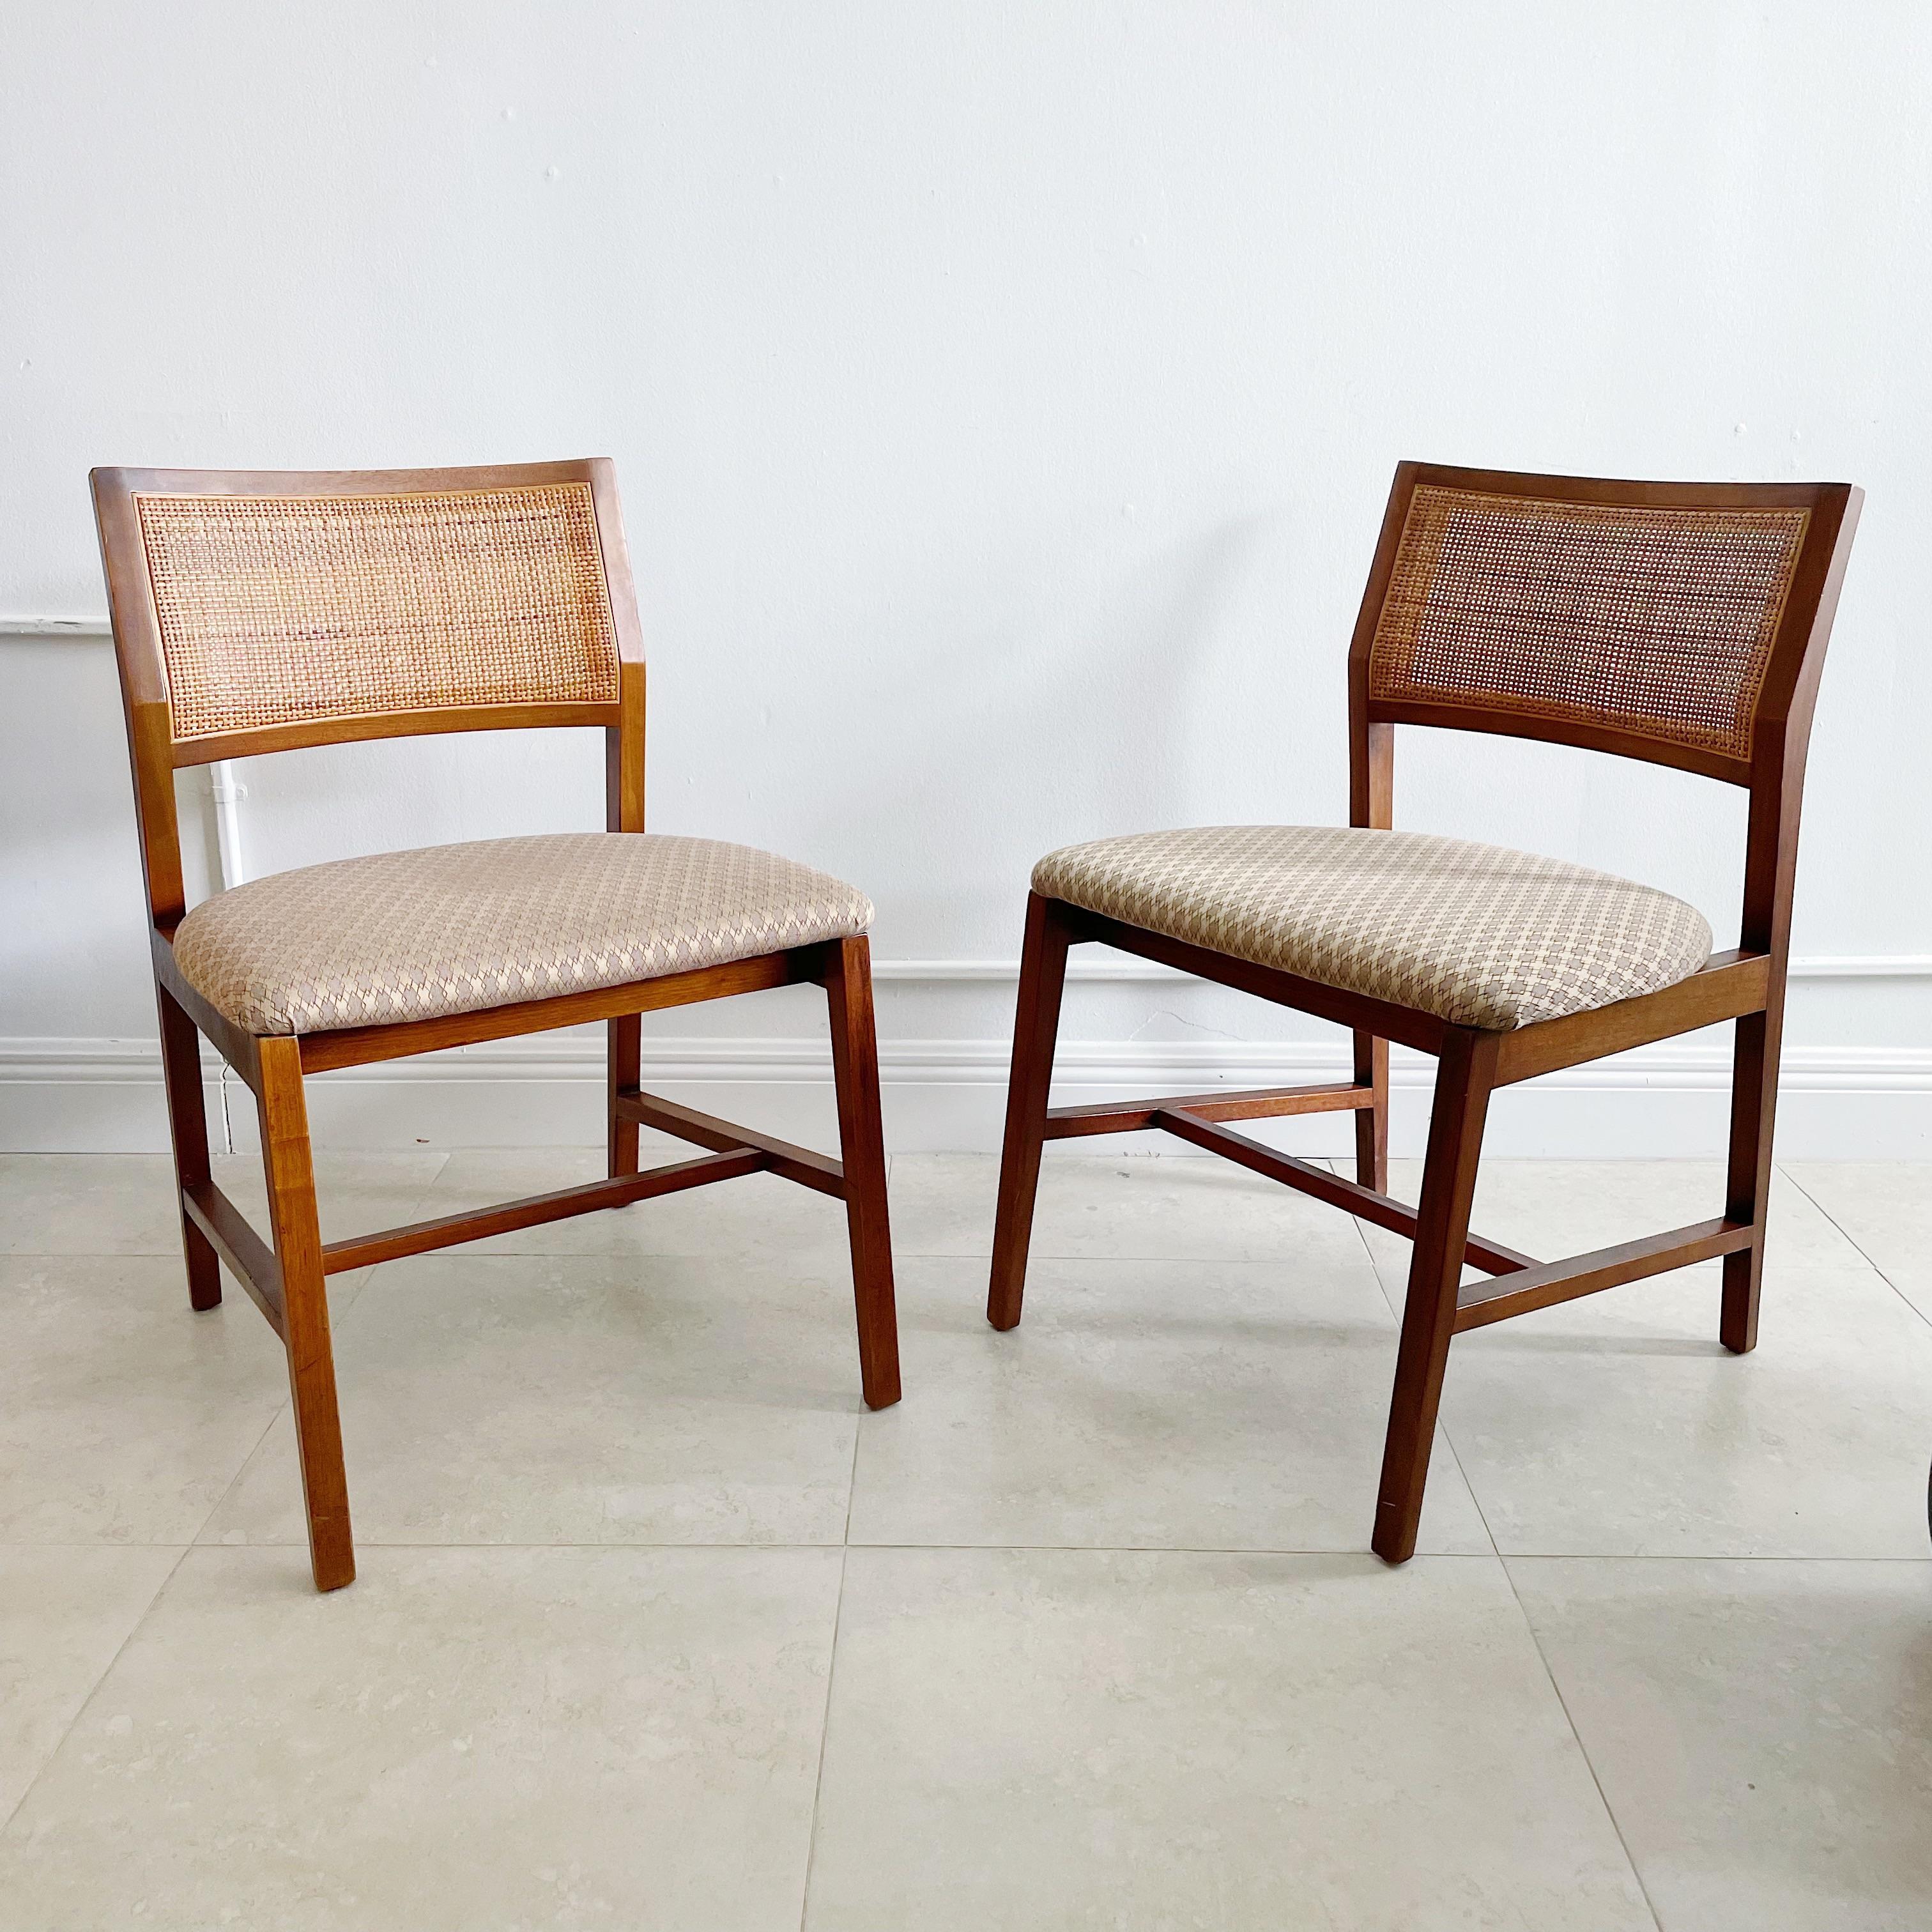 Caning Edward Wormley for Dunbar Pair Vienna Straw Cane Back Side Chairs